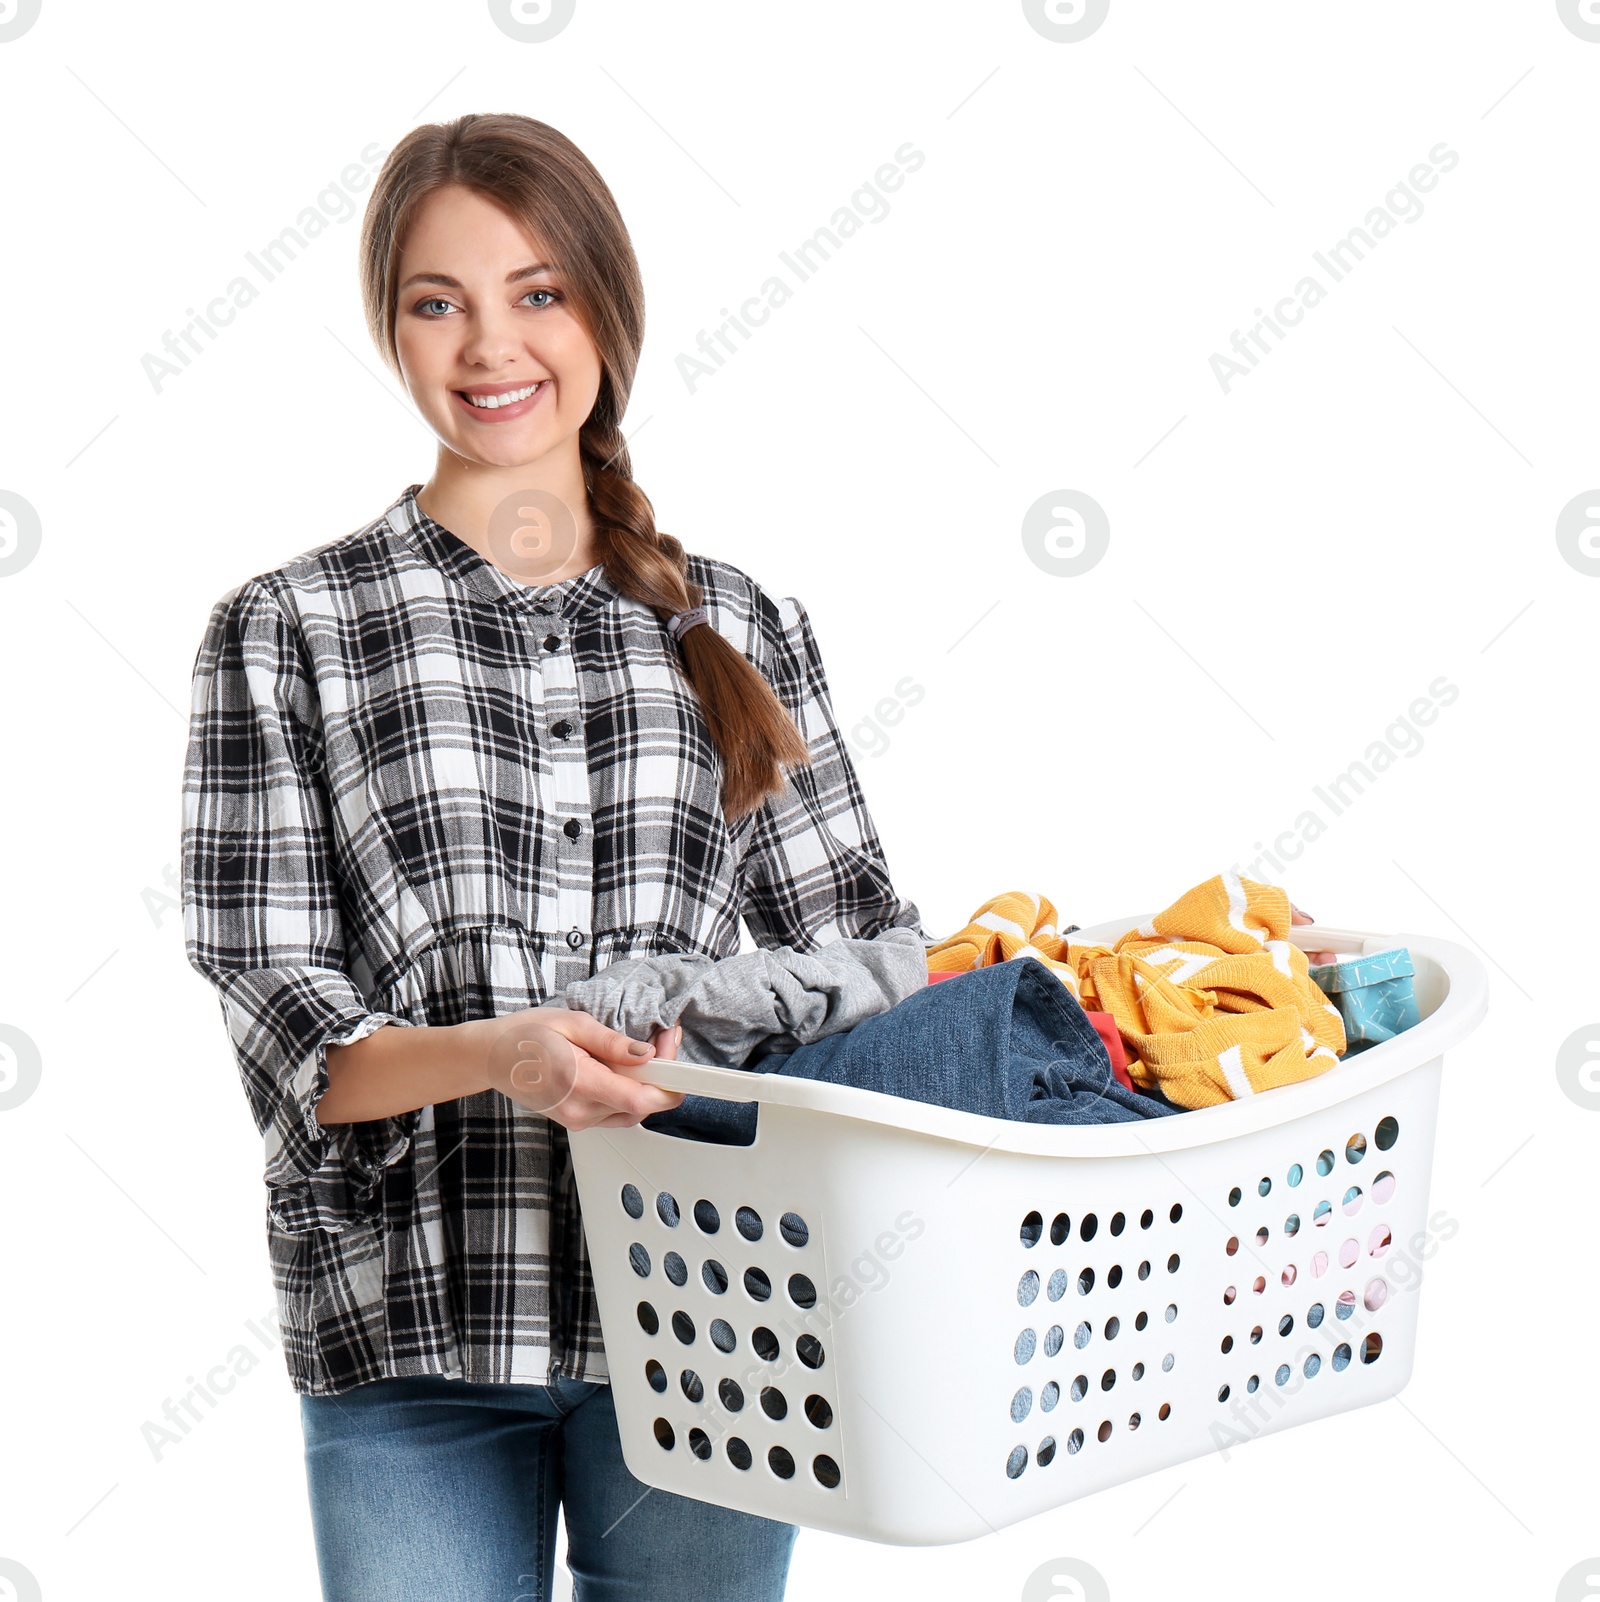 Photo of Happy young woman holding basket with laundry on white background